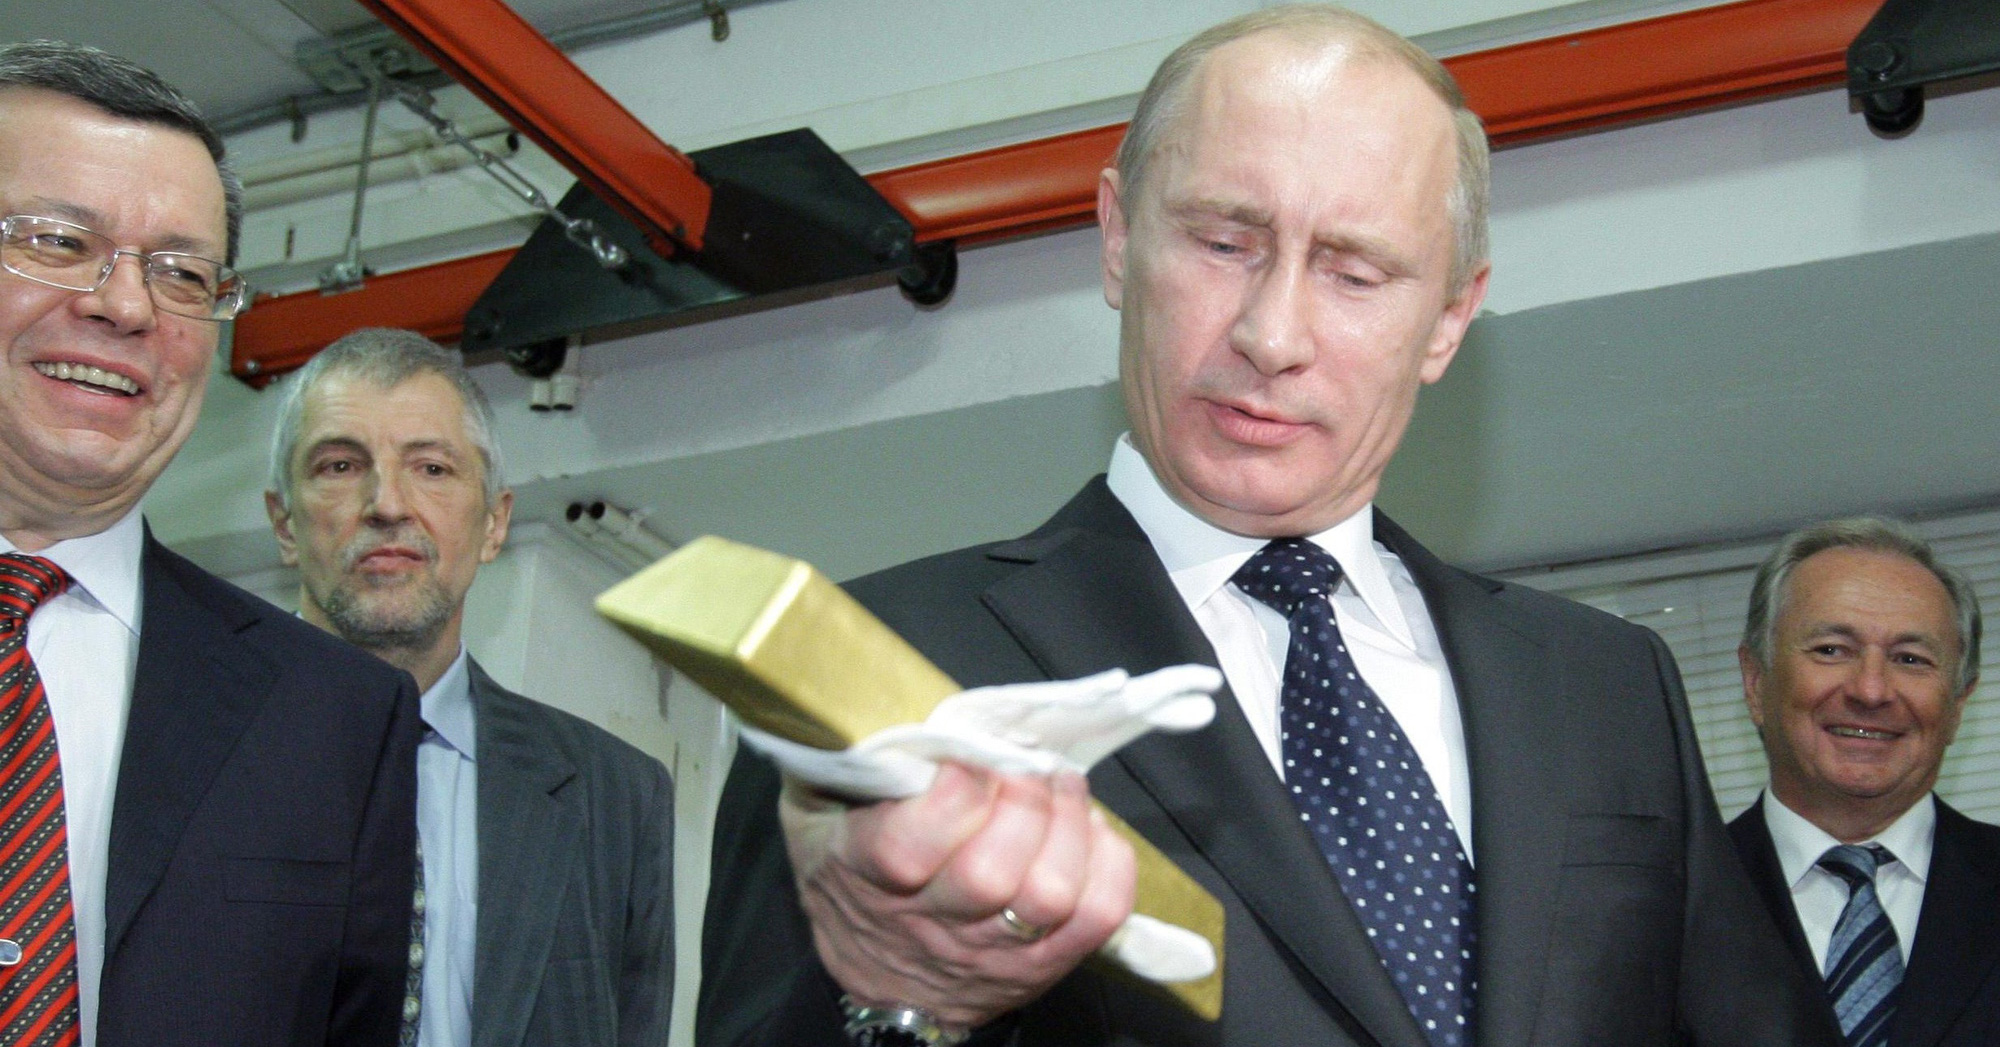 This is the highest earner in the Kremlin, nearly 10 times more than Putin